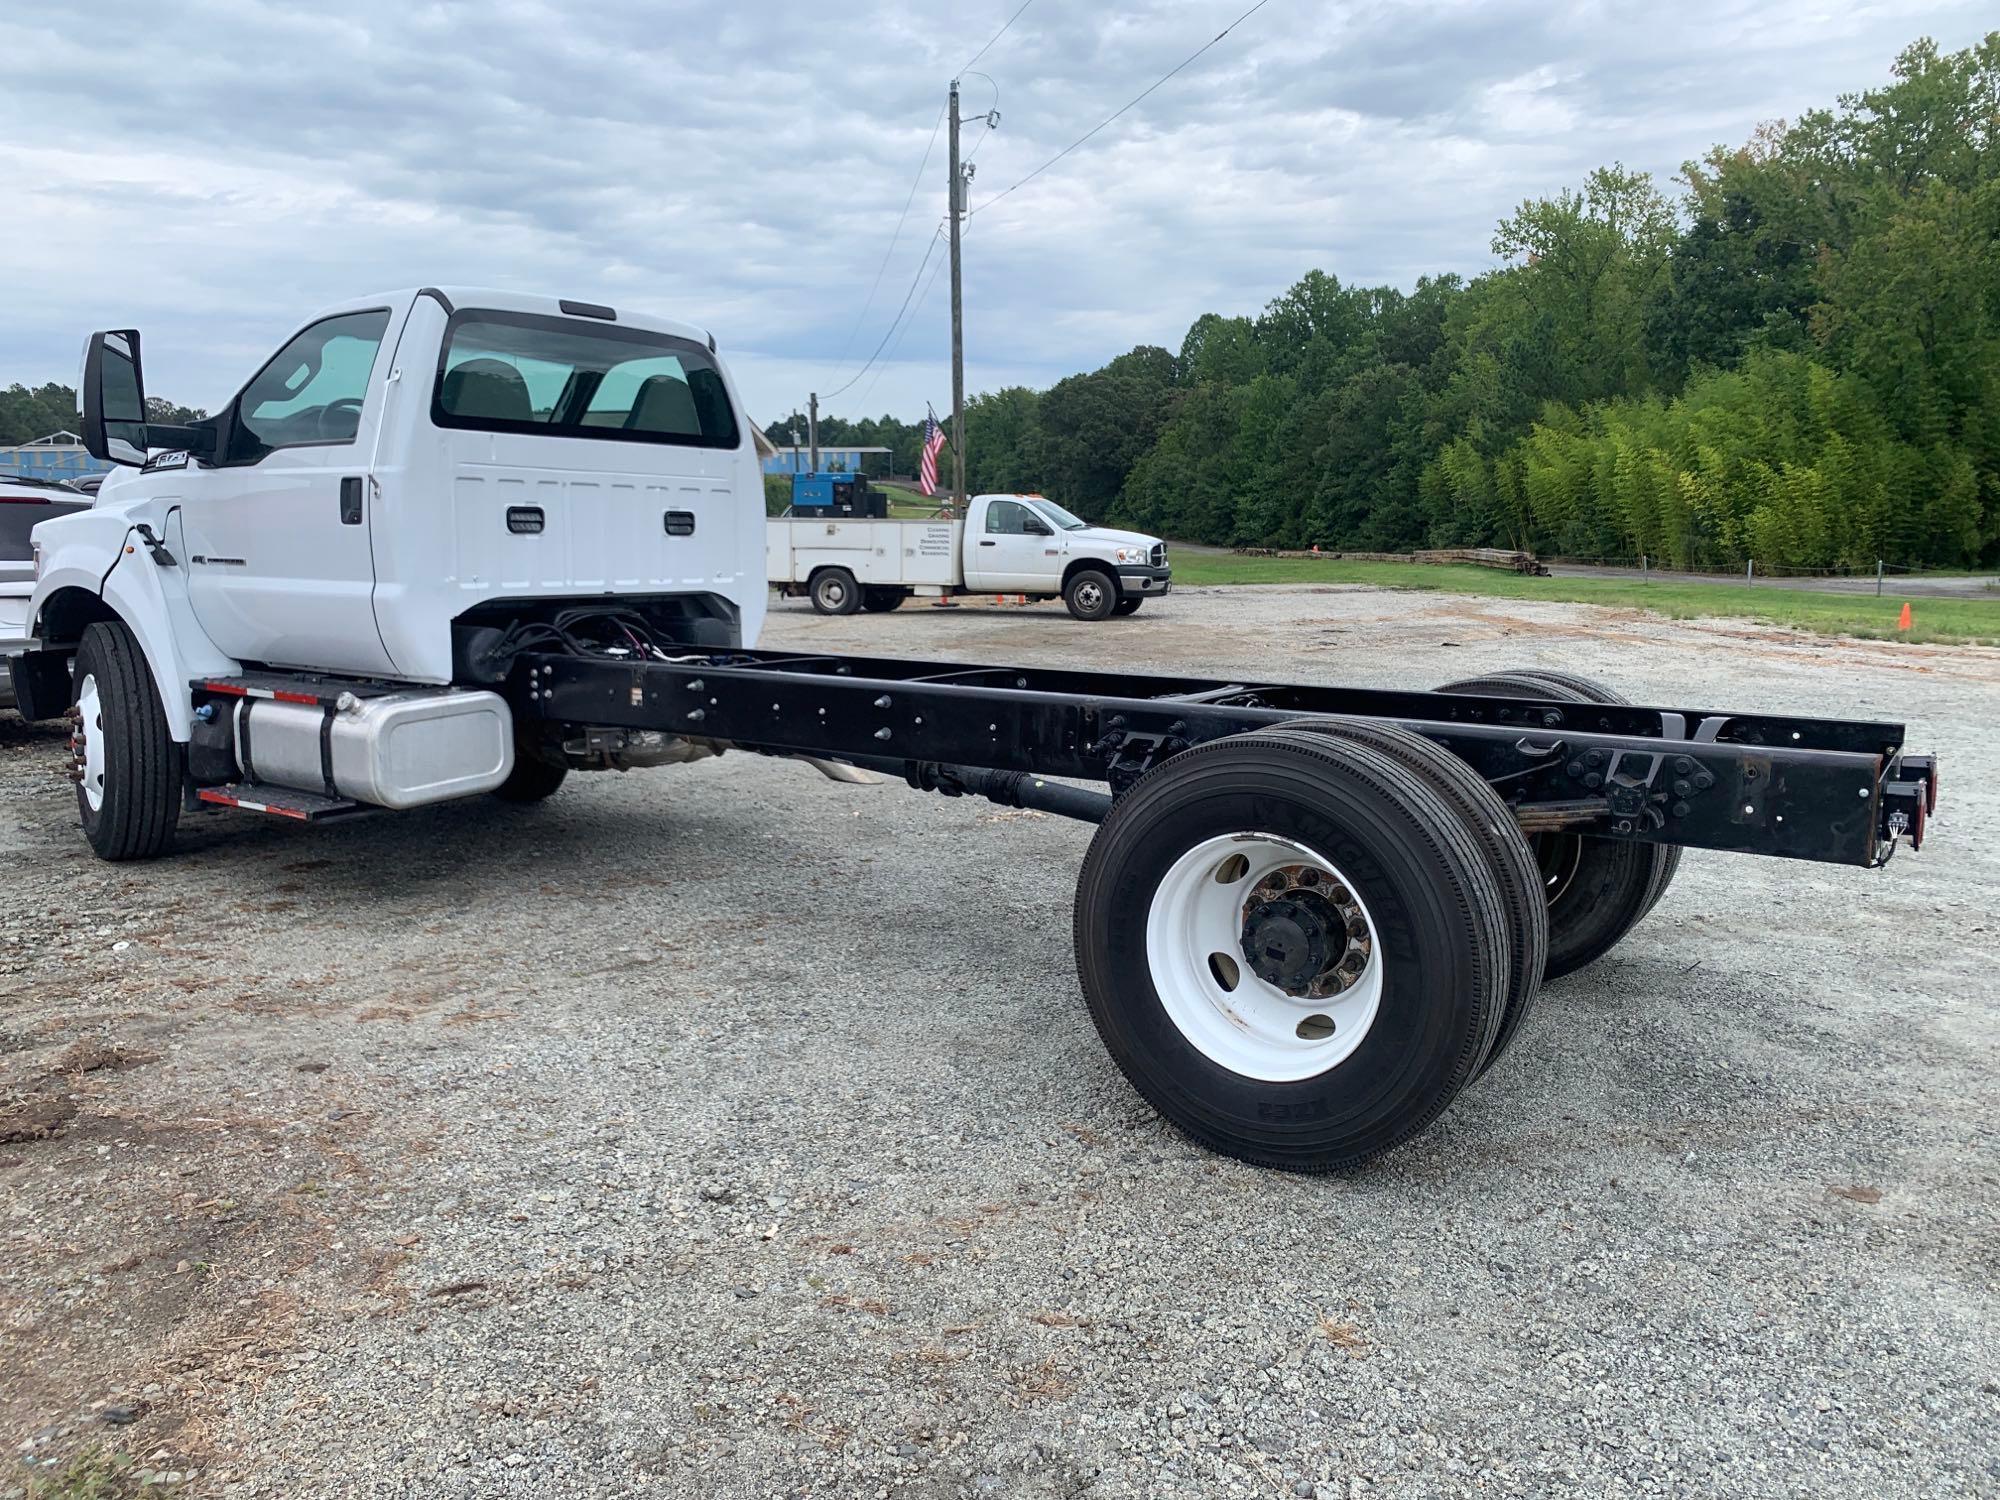 2019 FORD F750 S/A CAB & CHASSIS TRUCK